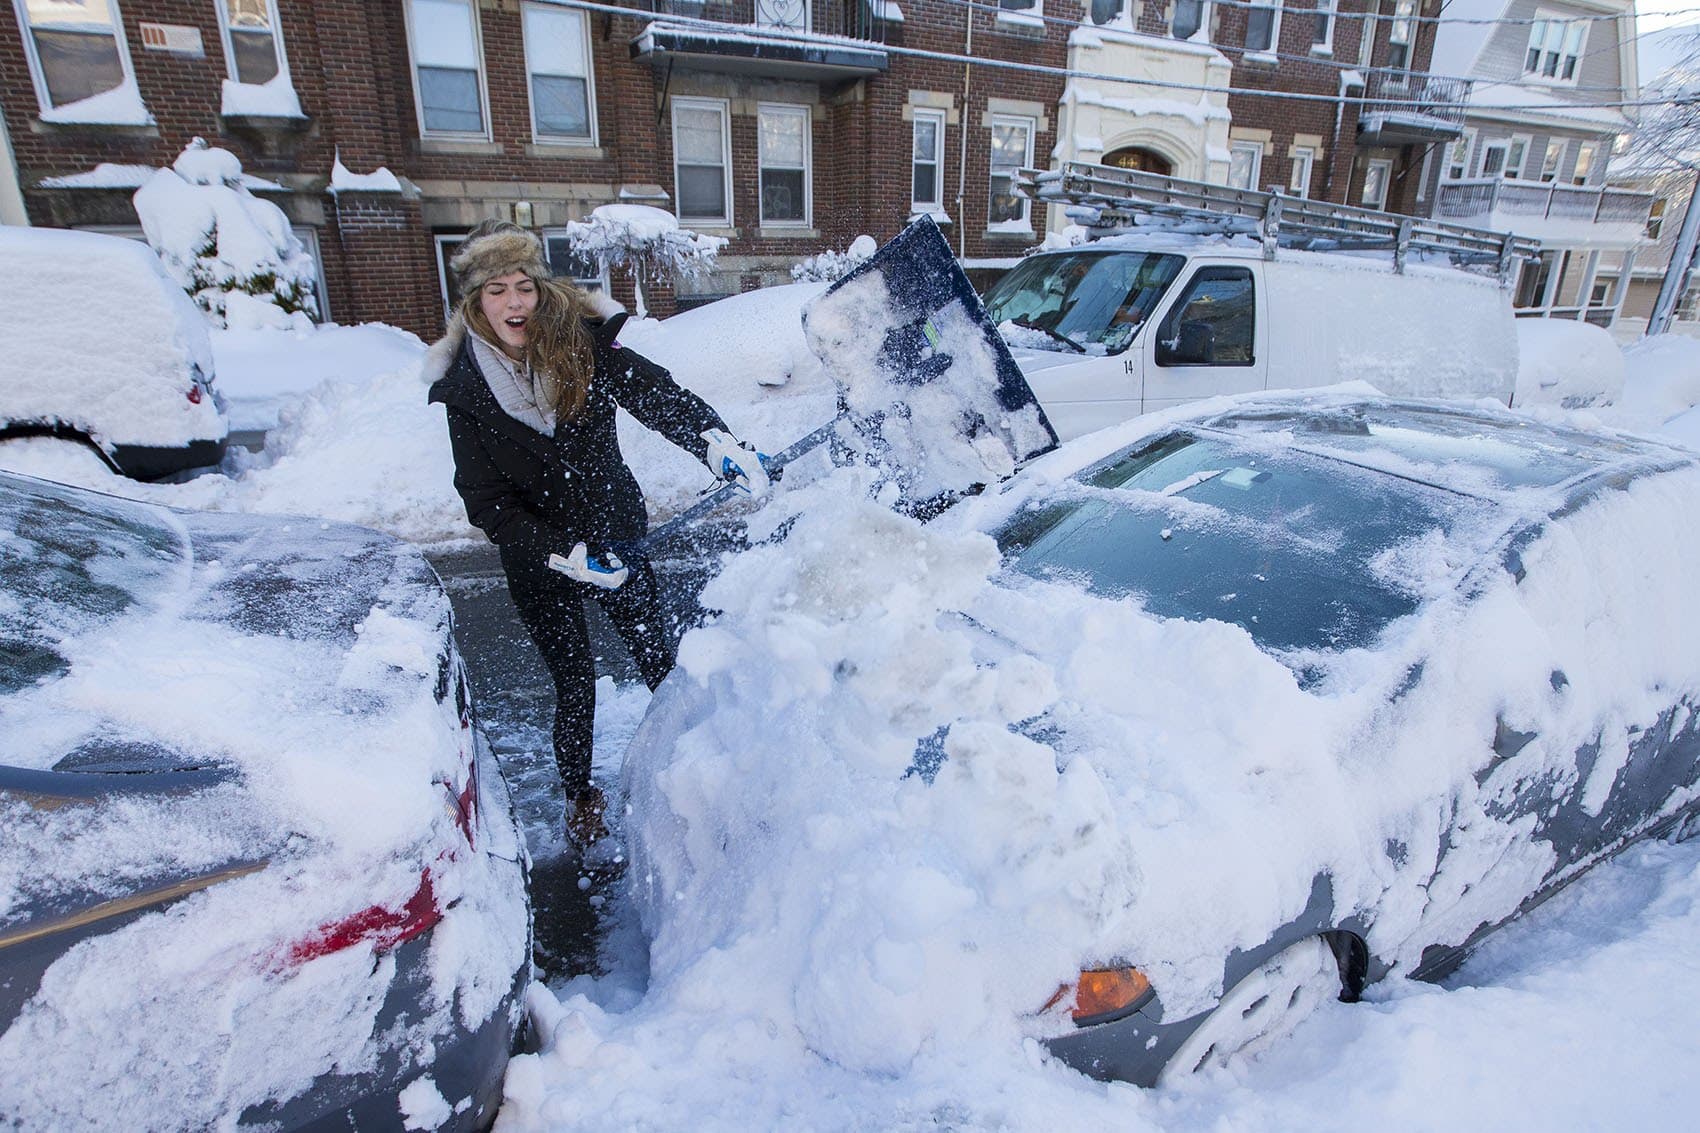 Karissa Medieros shovels her car out of the snow on Quint Street in Allston. (Jesse Costa/WBUR)